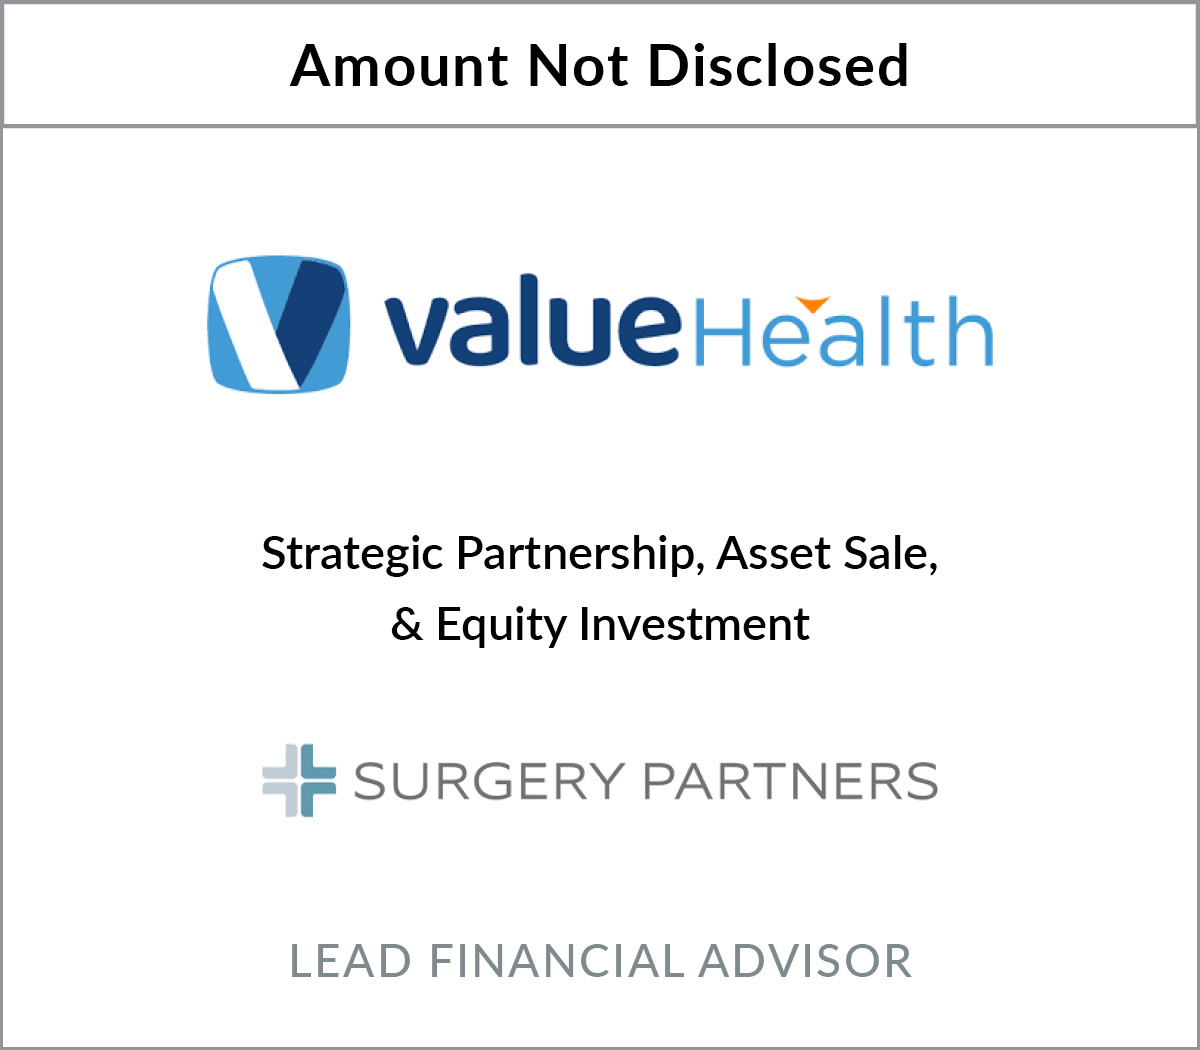 Bryant Park Capital Advises ValueHealth in Strategic Relationship with Surgery Partners